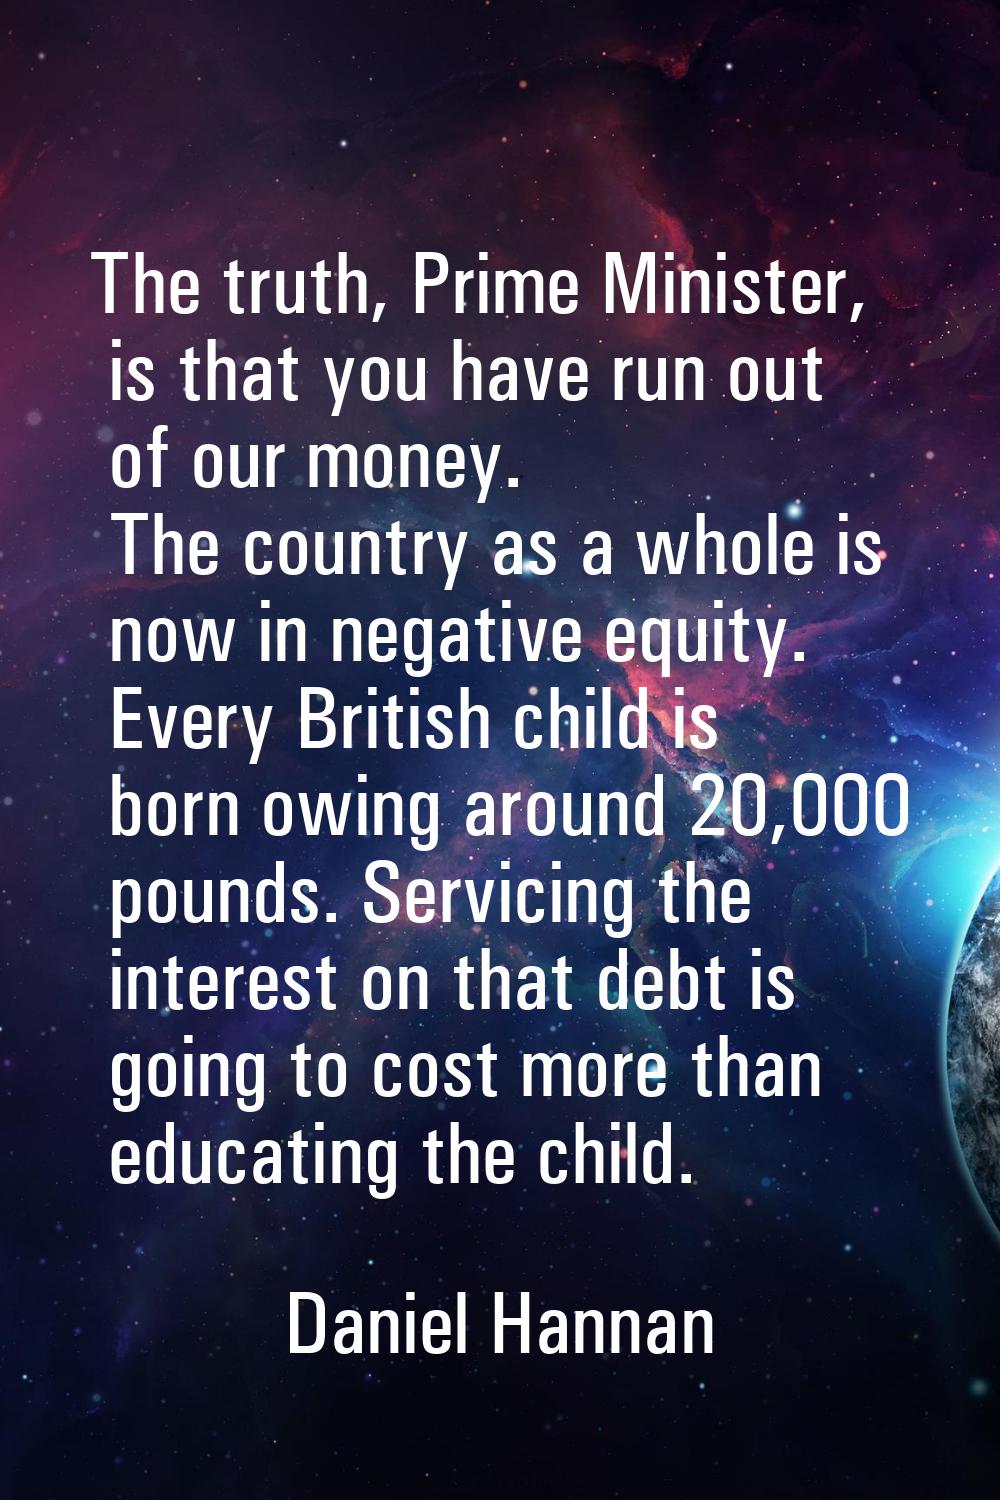 The truth, Prime Minister, is that you have run out of our money. The country as a whole is now in 